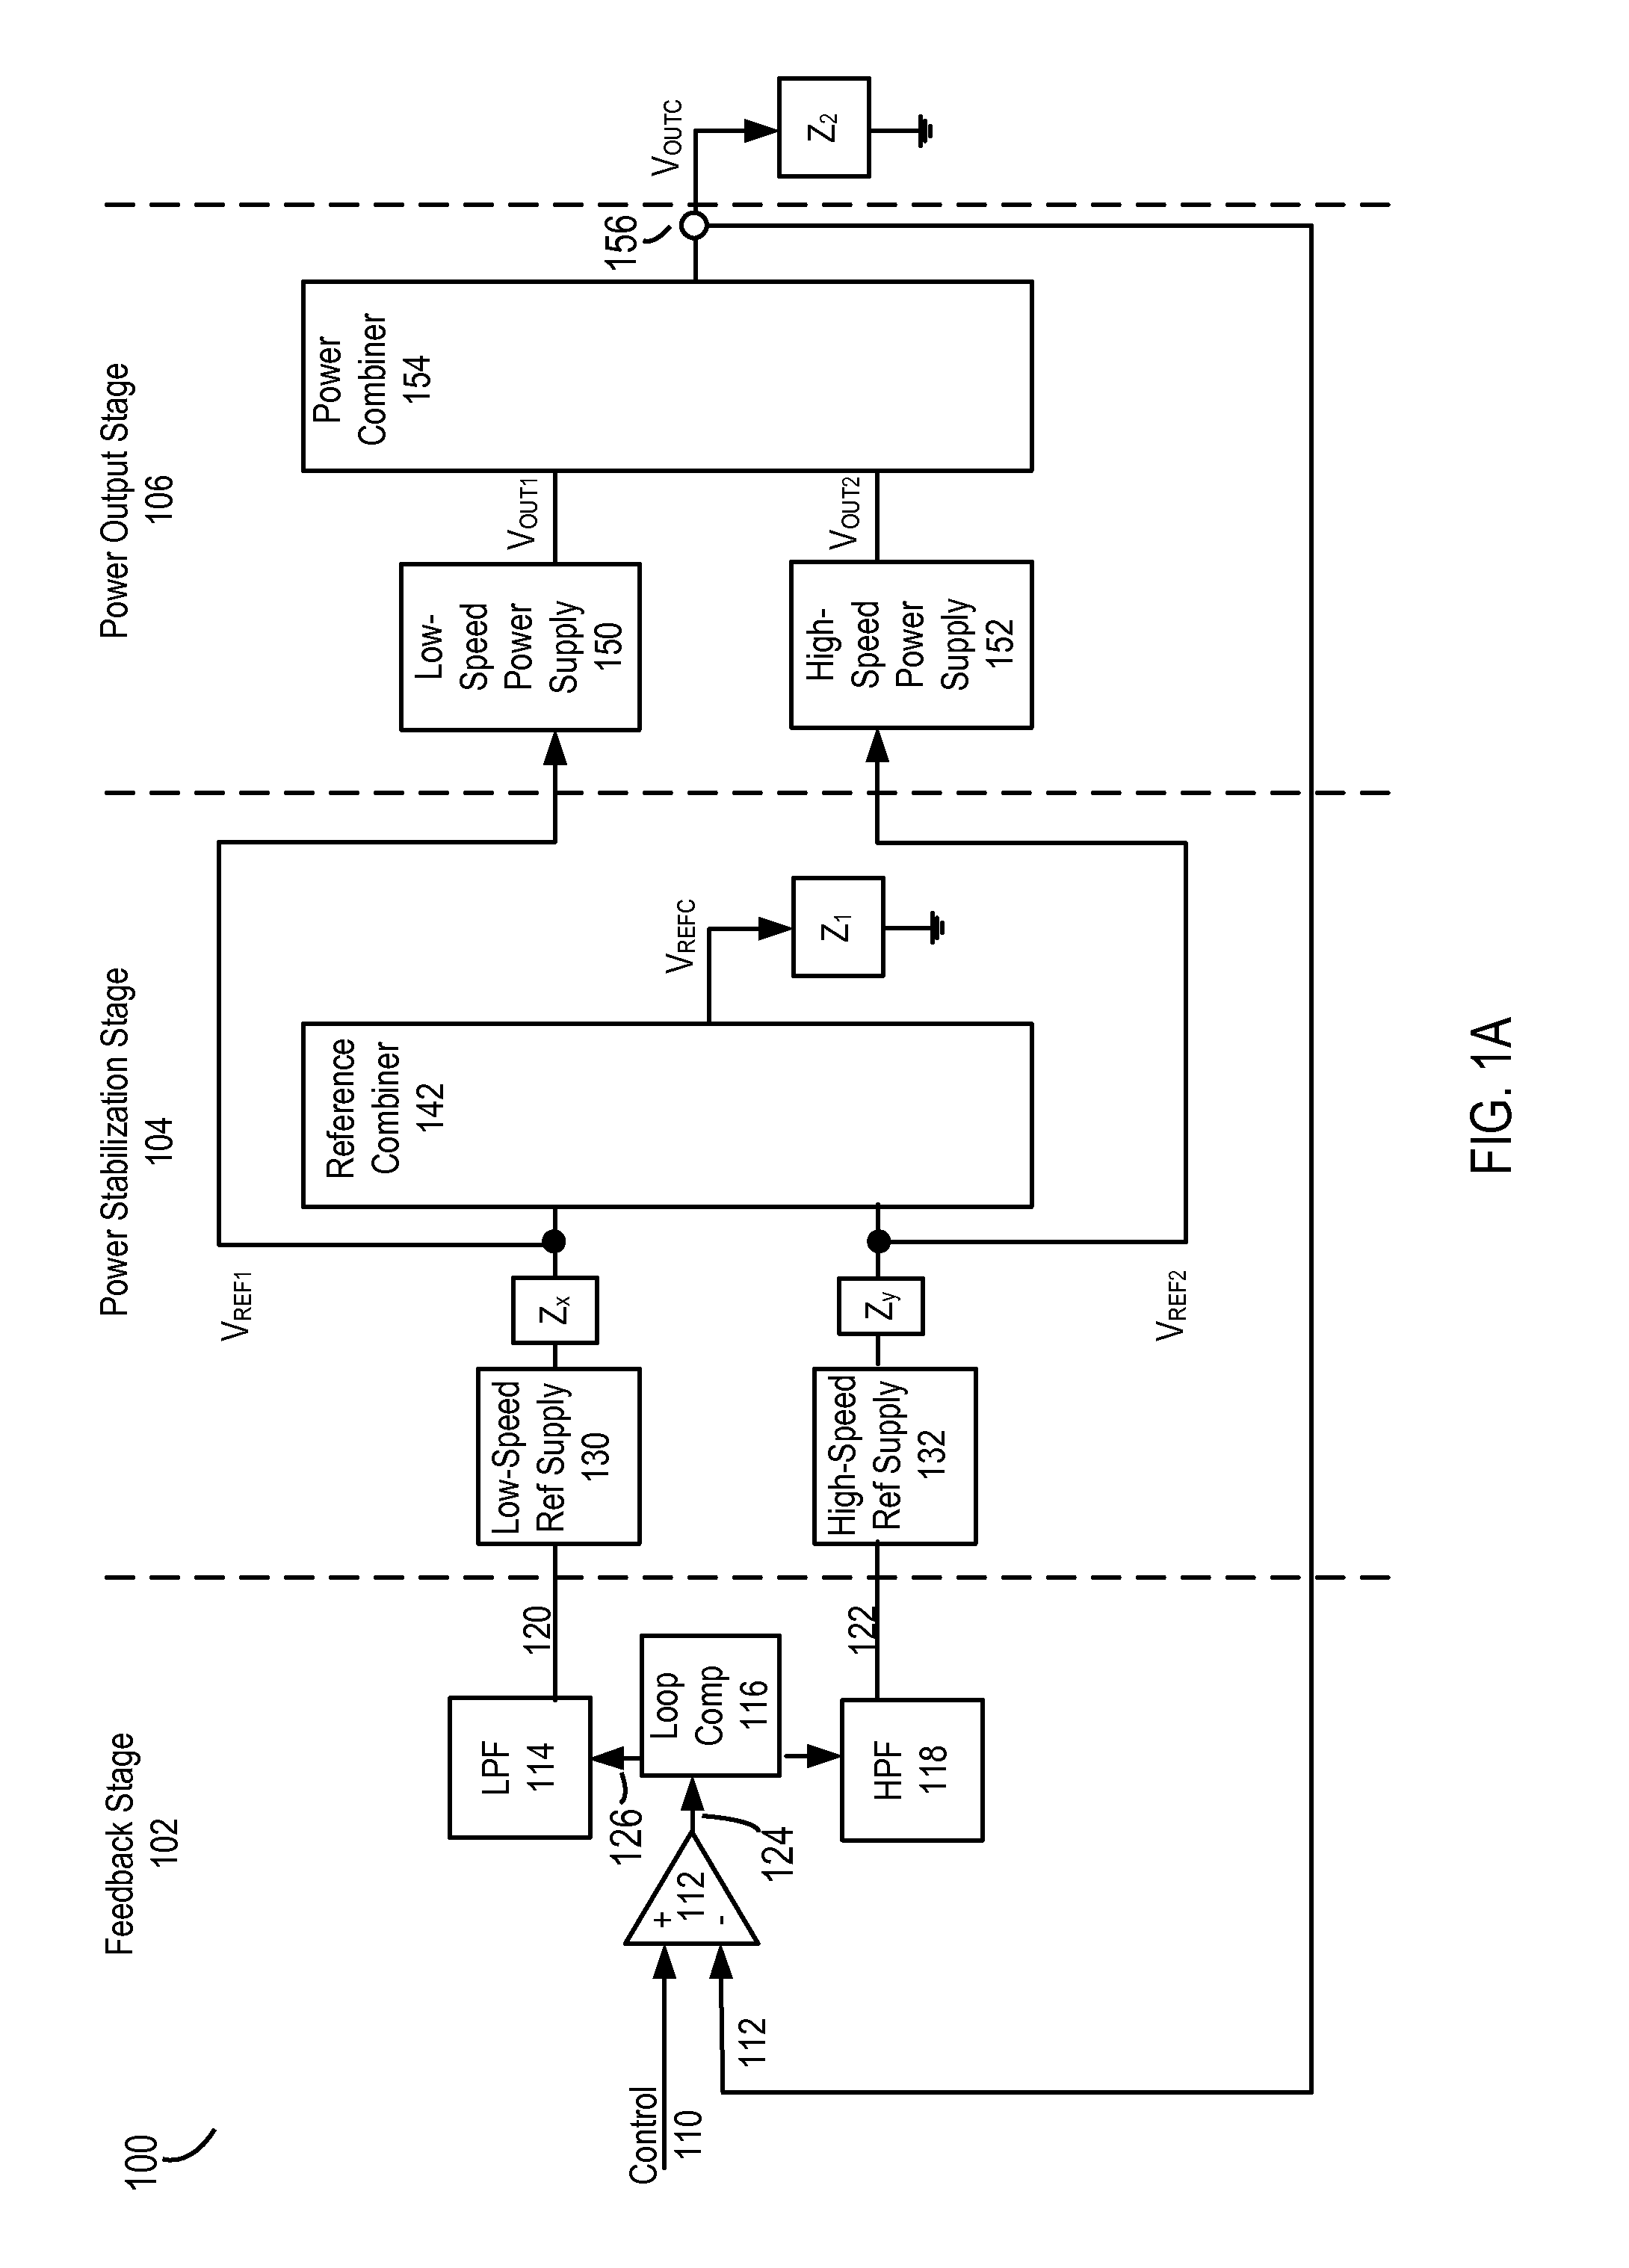 Stabilizing a Power Combining Power Supply System